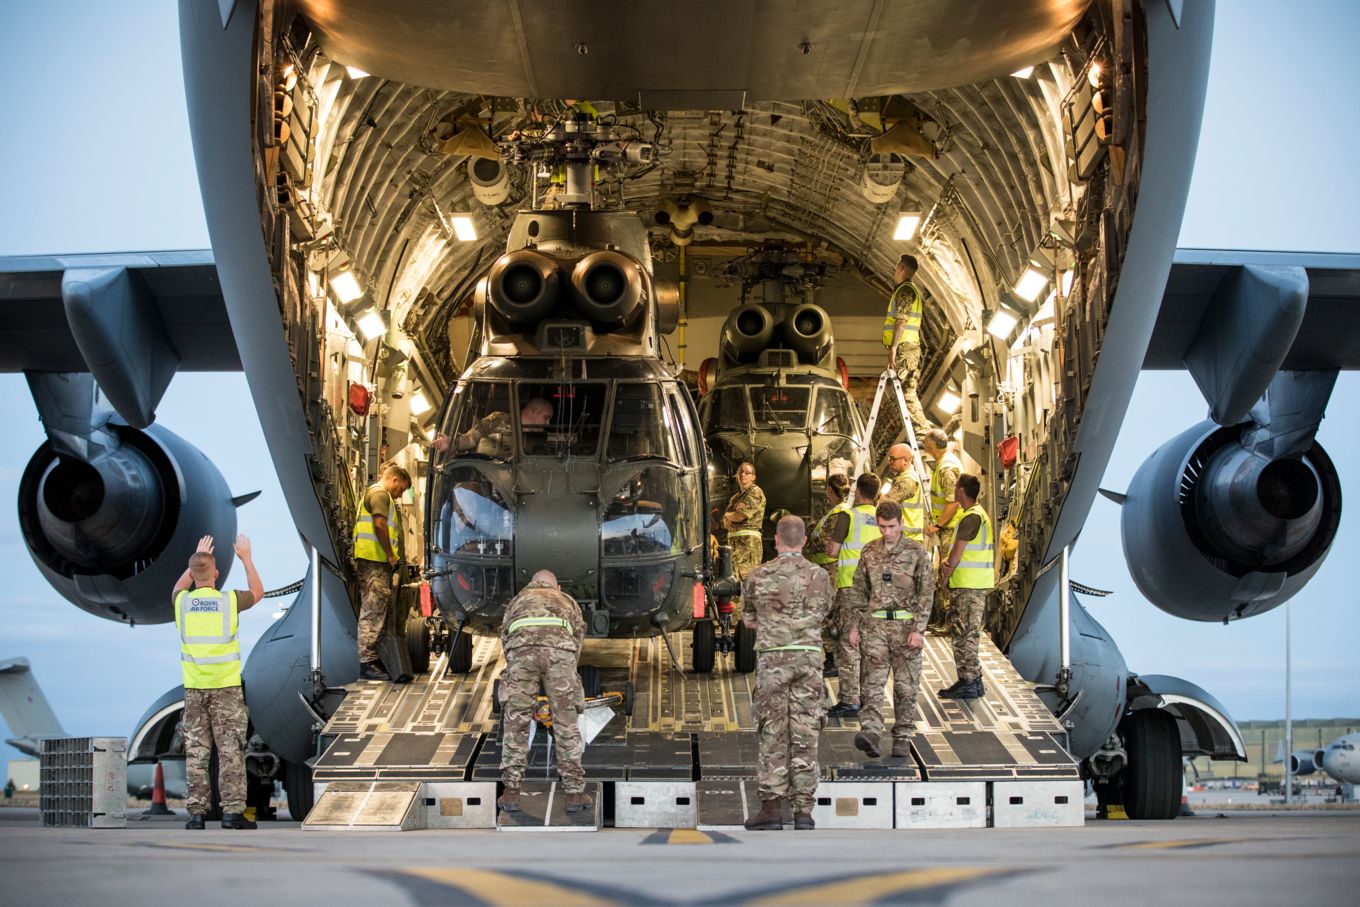 Image shows an RAF C-17 aircraft with two helicopters inside.